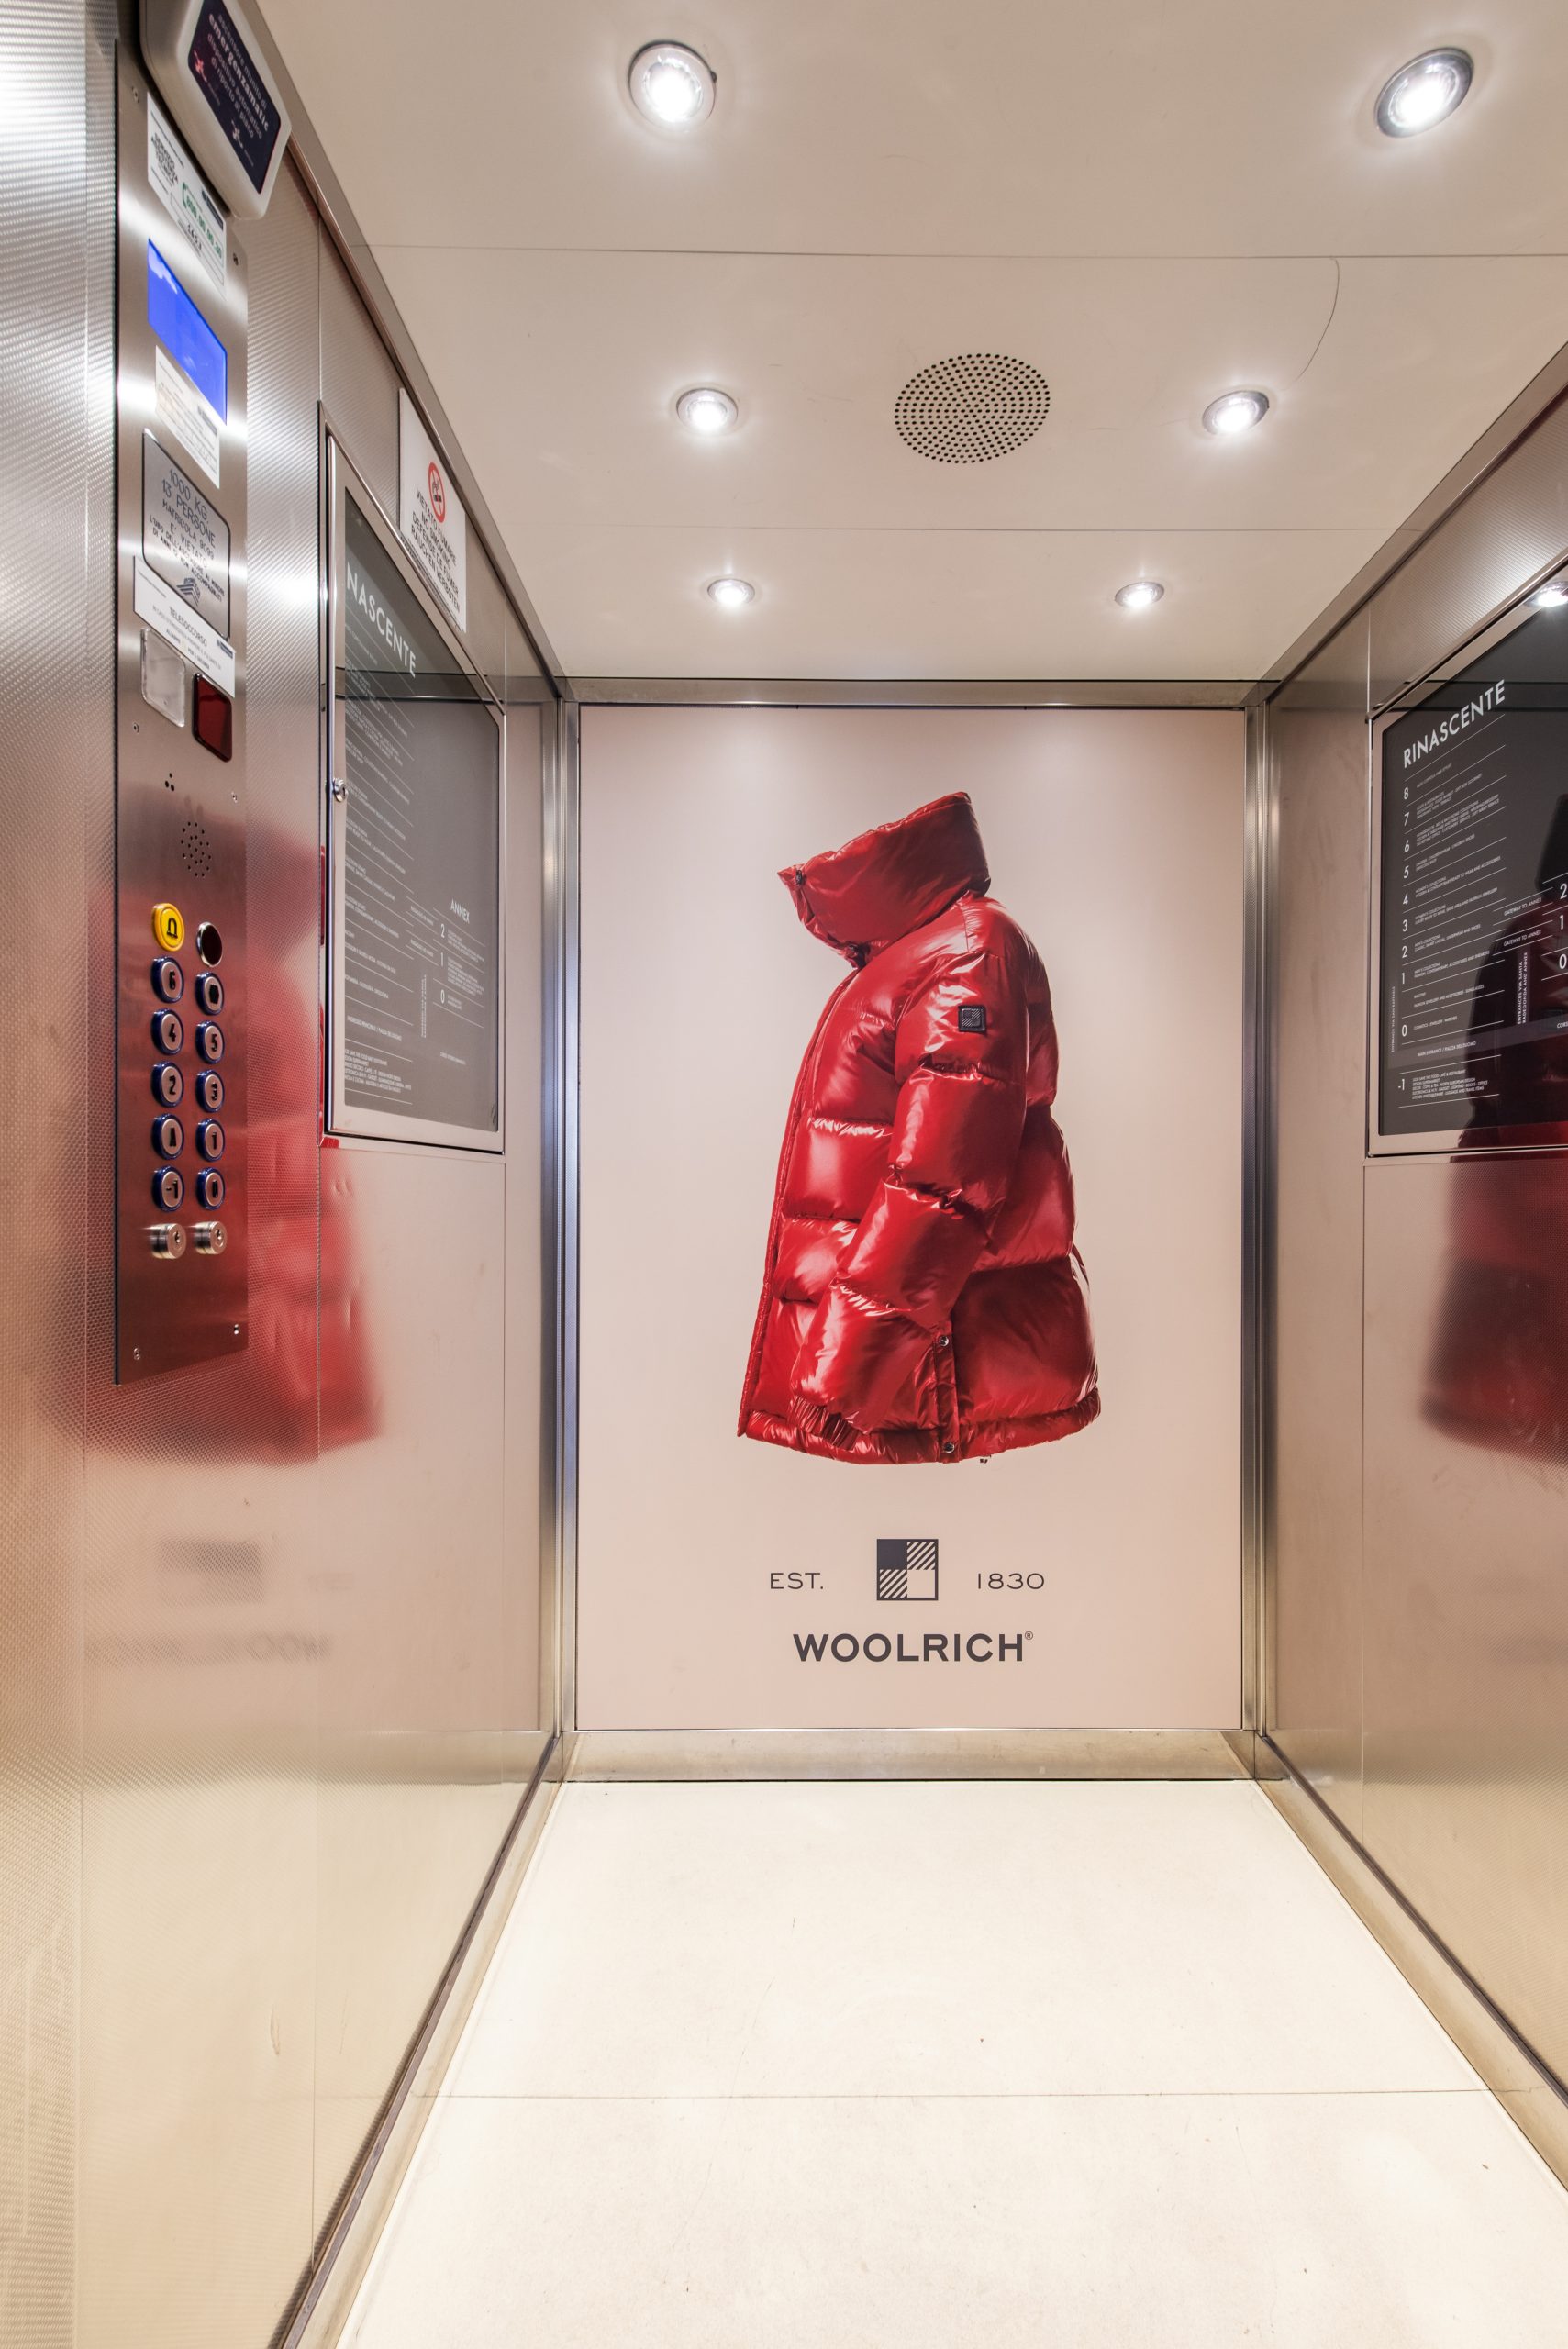 Woolrich images in elevator at Rinascente, Milano